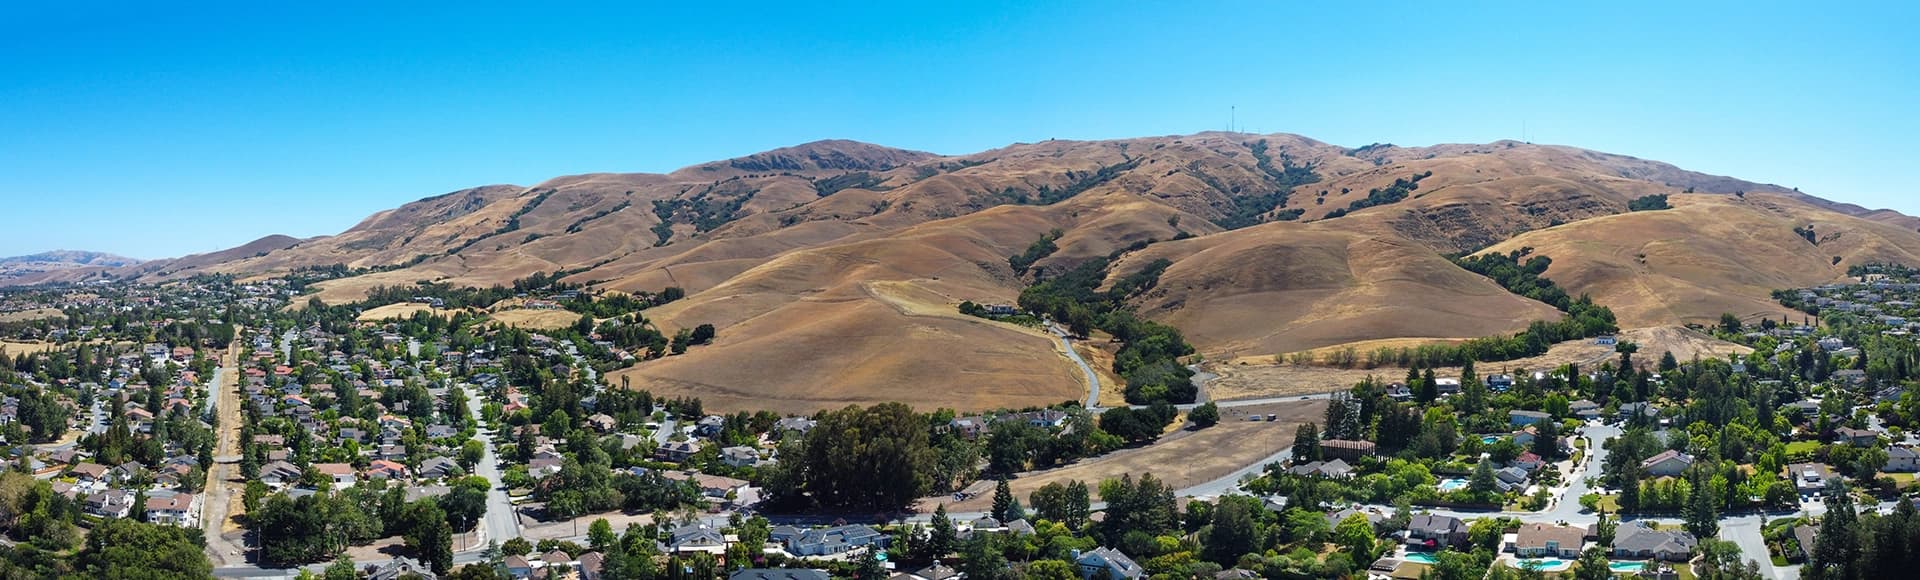 Panorama of the Mission Hills neighborhood in Fremont, California. Mission Peak is in the background.